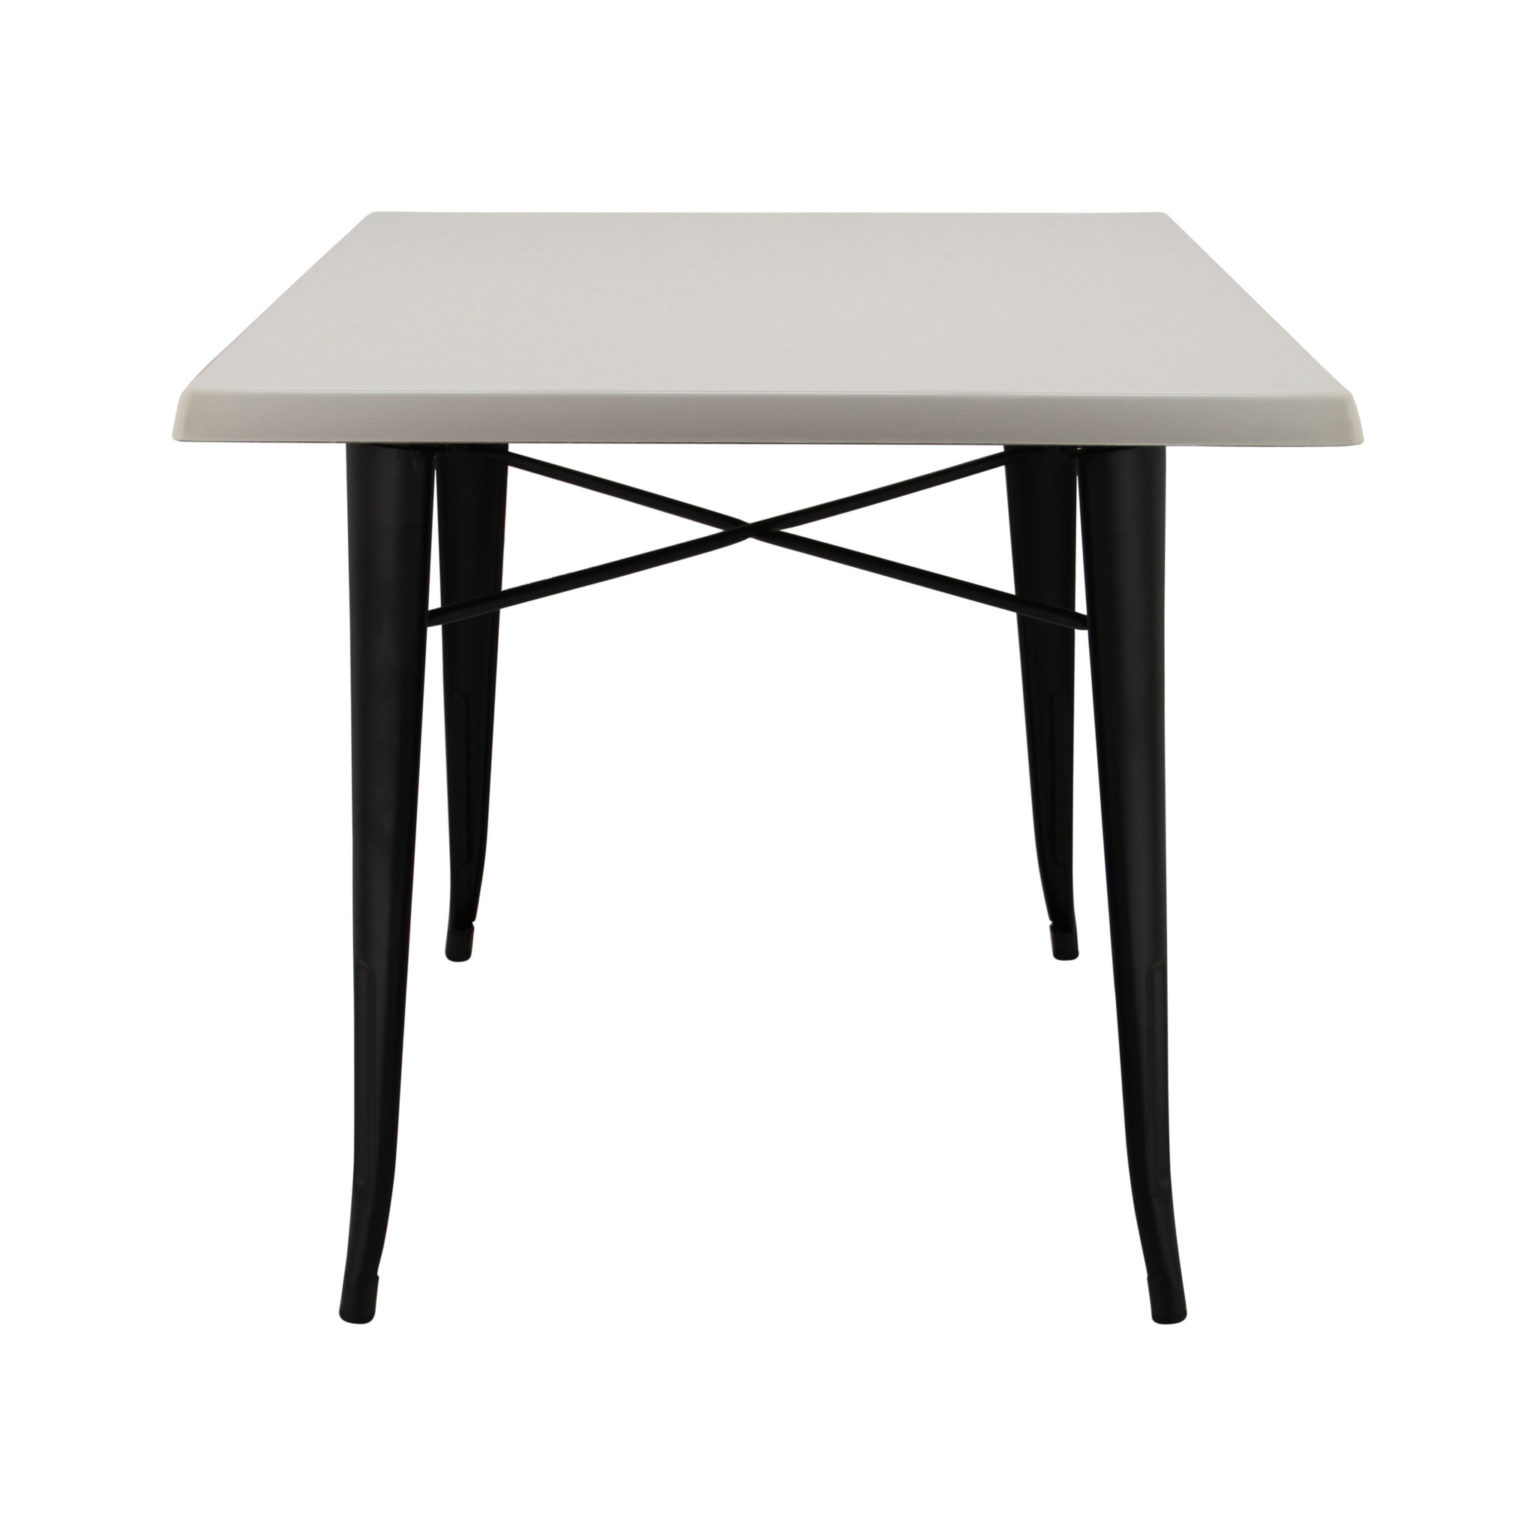 800mm Square White Isotop Table with Black Tolix Base